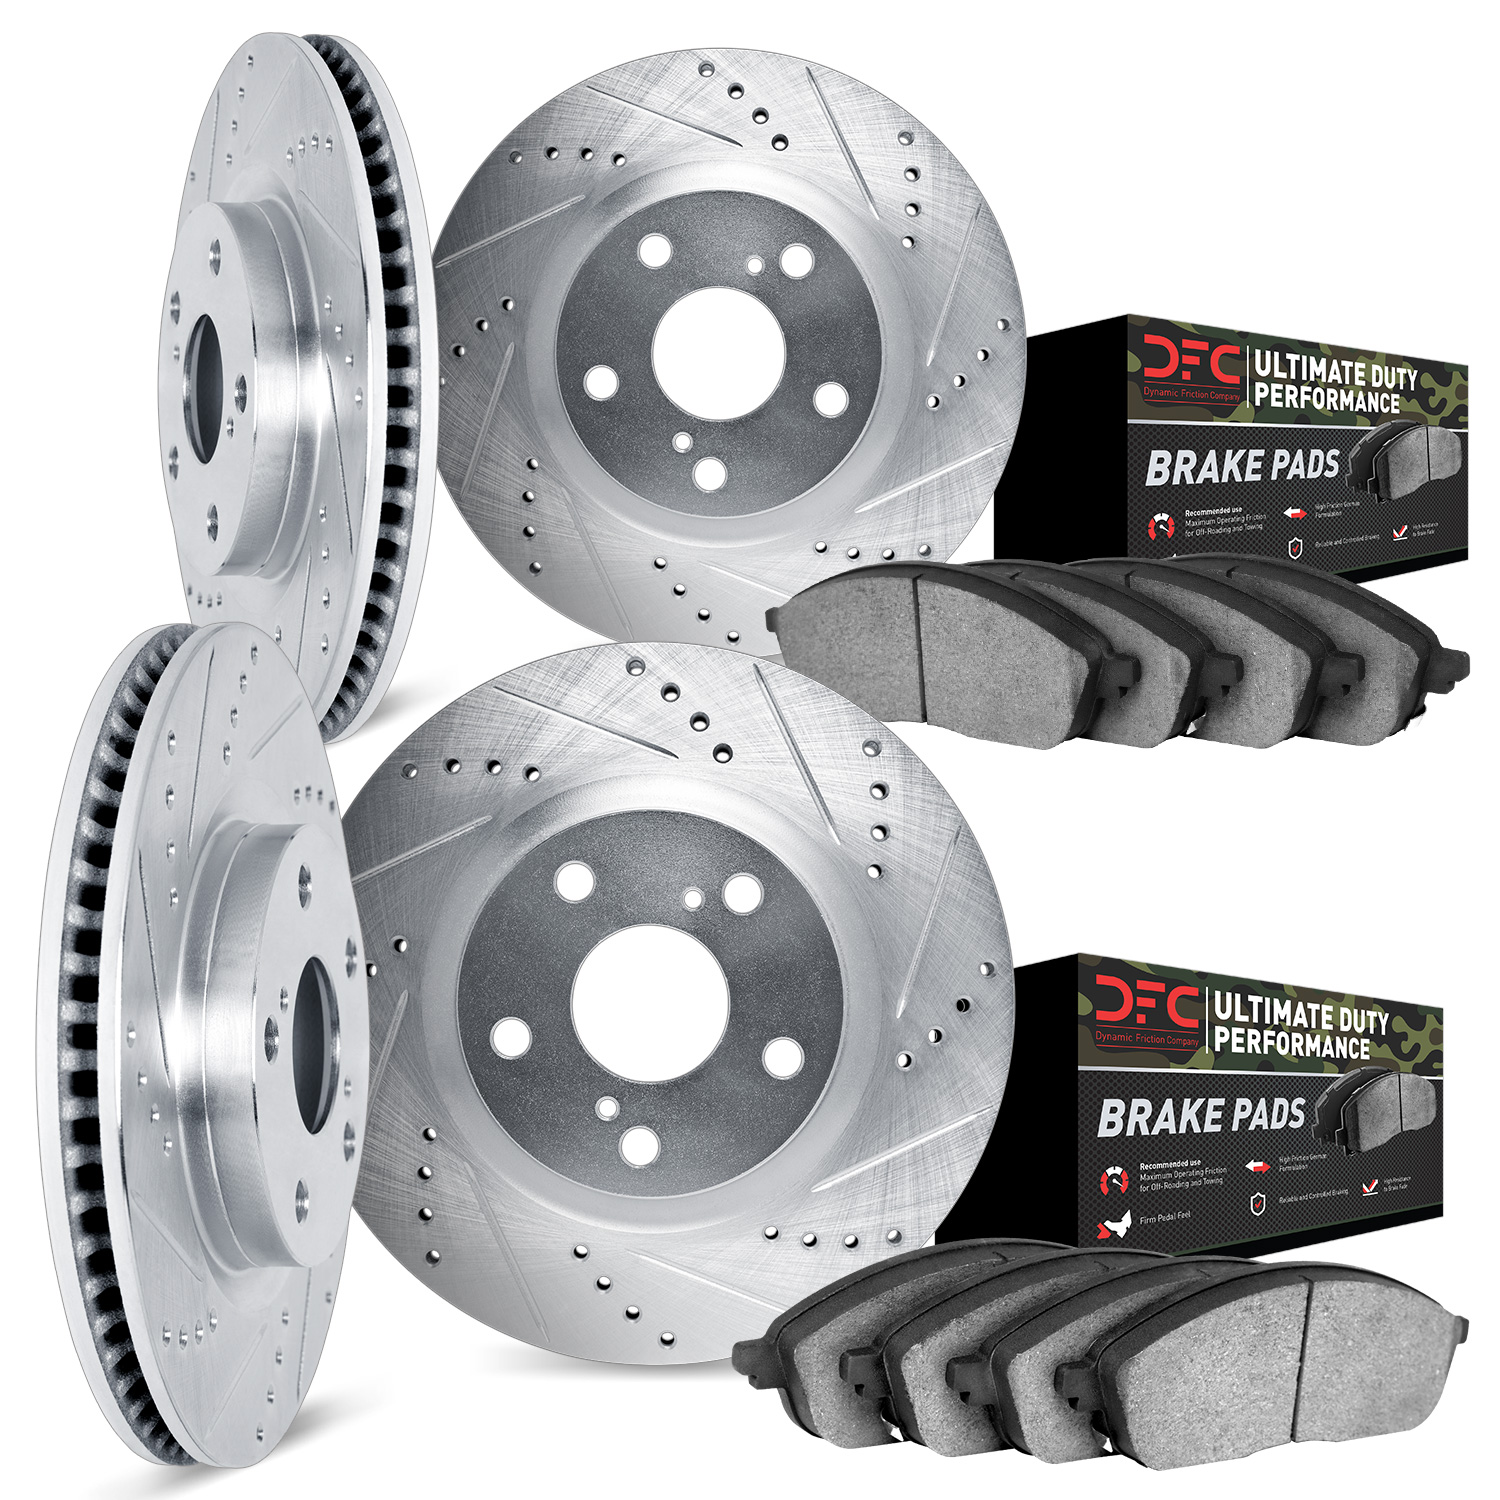 7404-40002 Drilled/Slotted Brake Rotors with Ultimate-Duty Brake Pads Kit [Silver], 2006-2018 Mopar, Position: Front and Rear